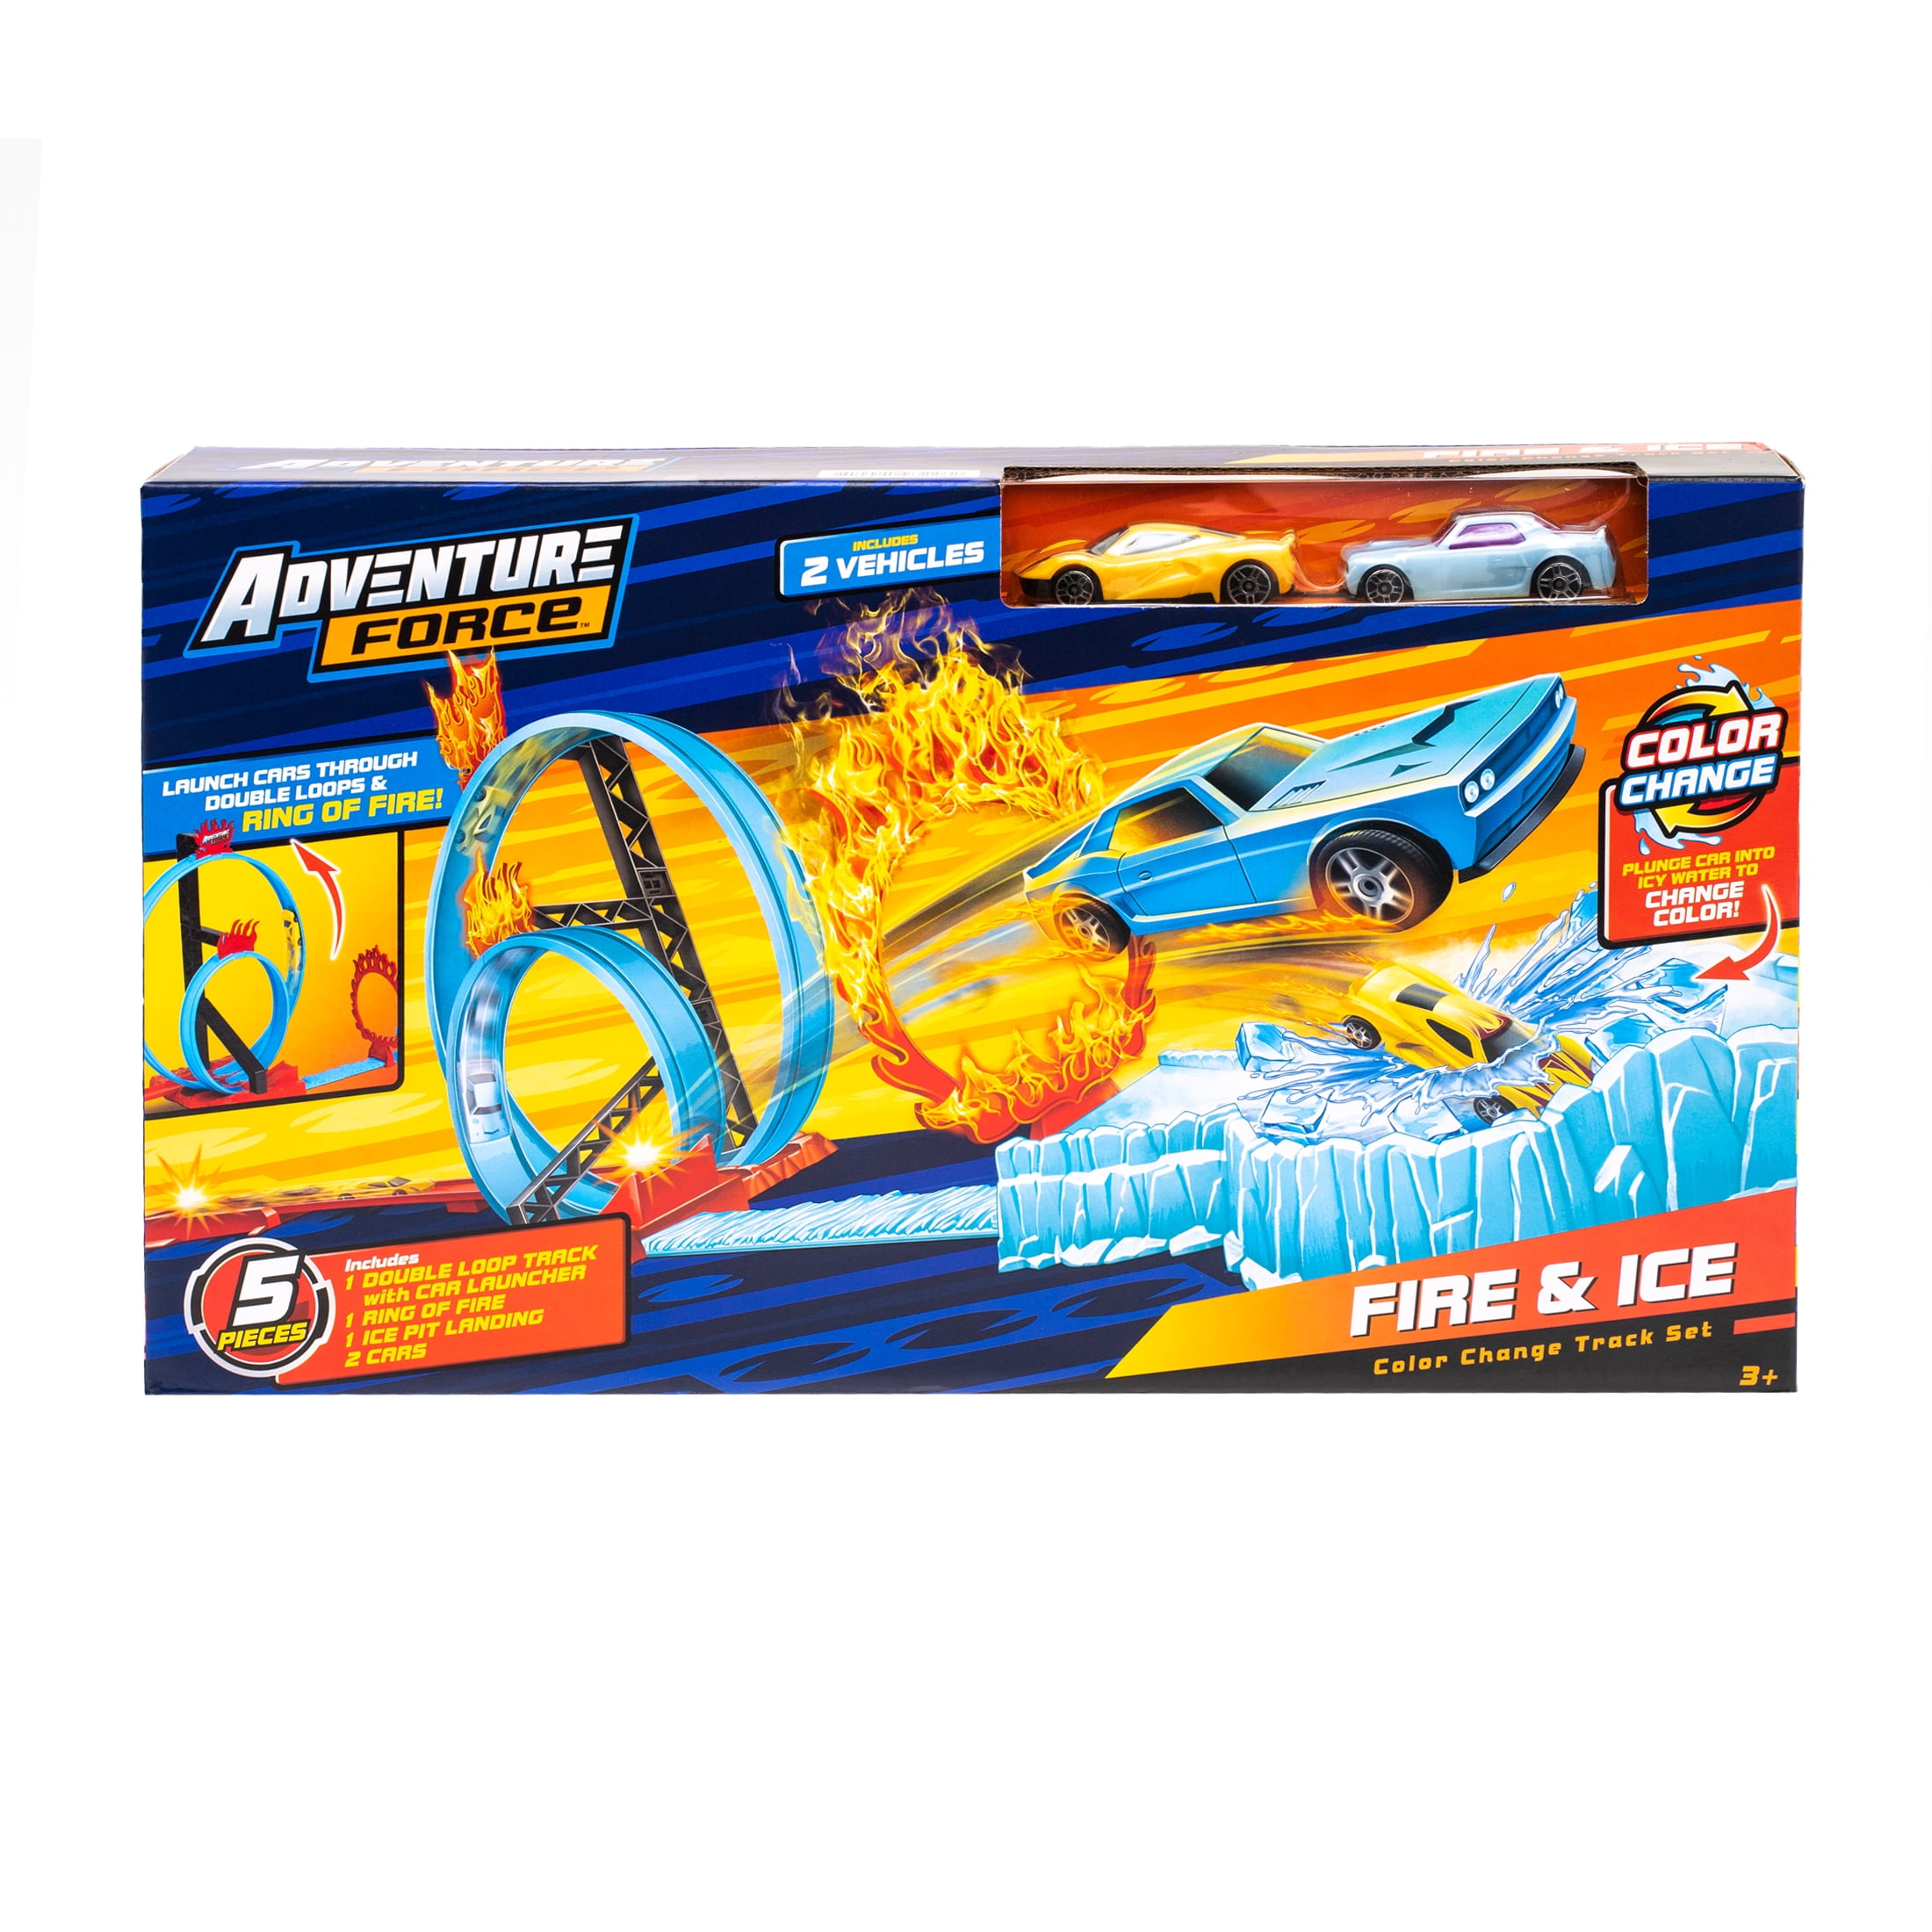 Adventure Force Fire and Ice, Color Change Track Set, Includes 2 Cars,Children Ages 3+